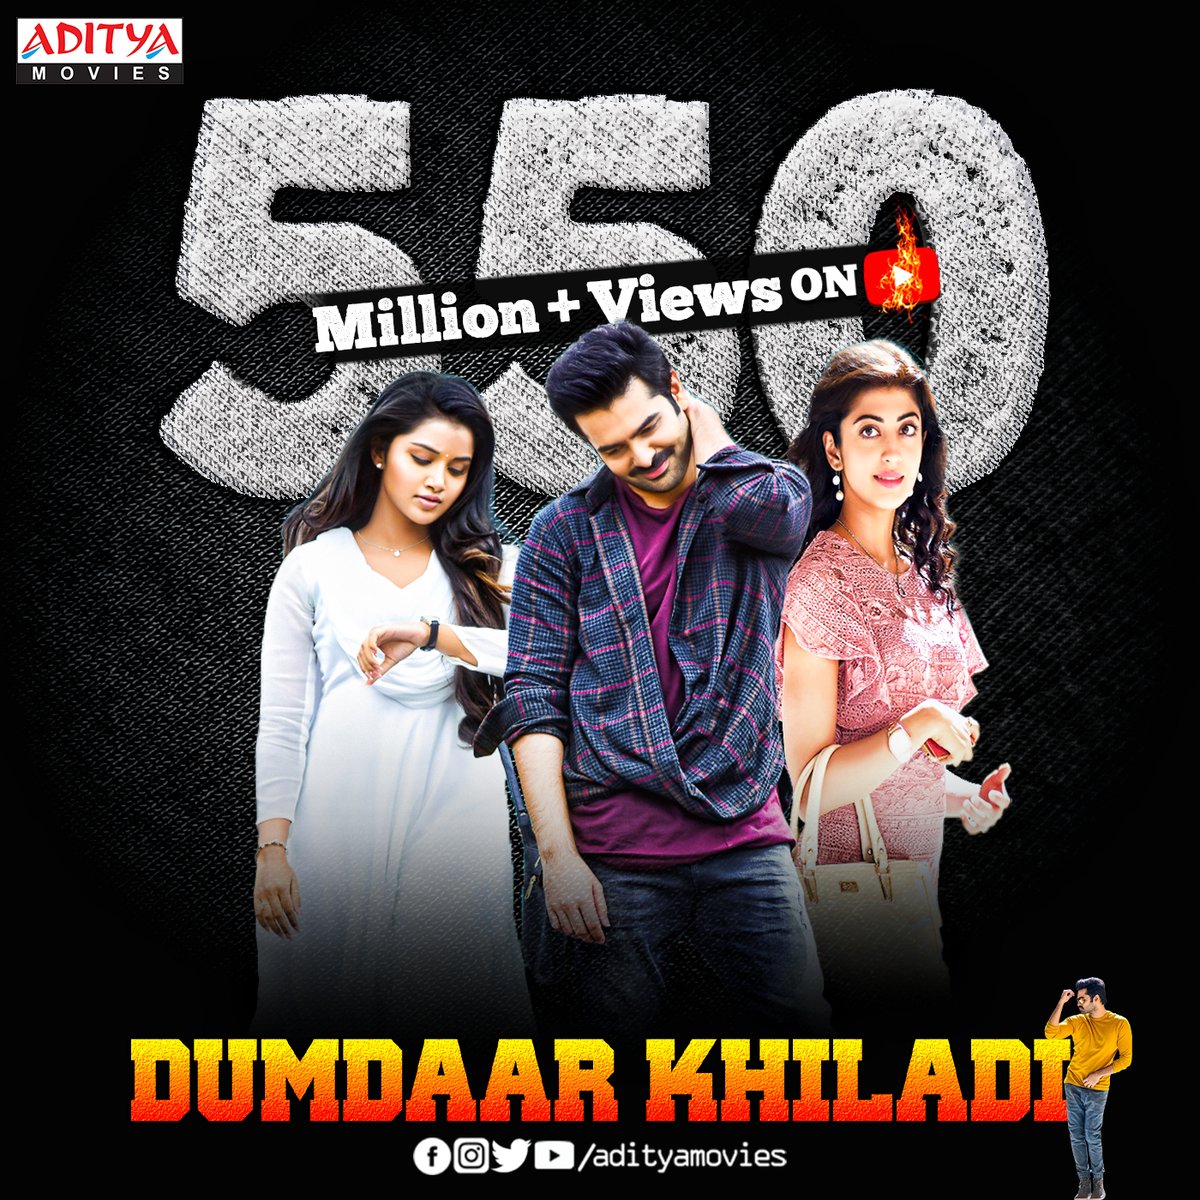 Hitting the 550 Million mark of 'Dumdaar Khiladi' Hindi dubbed Movie feels Surreal and Still Counting! Thank you for your constant love and incredible Support. ▶️ youtu.be/zAVmwt_U4c0  Ram Pothineni and Anupamaparameswaran's  ROM-COM Entertainment💥🍿🎥